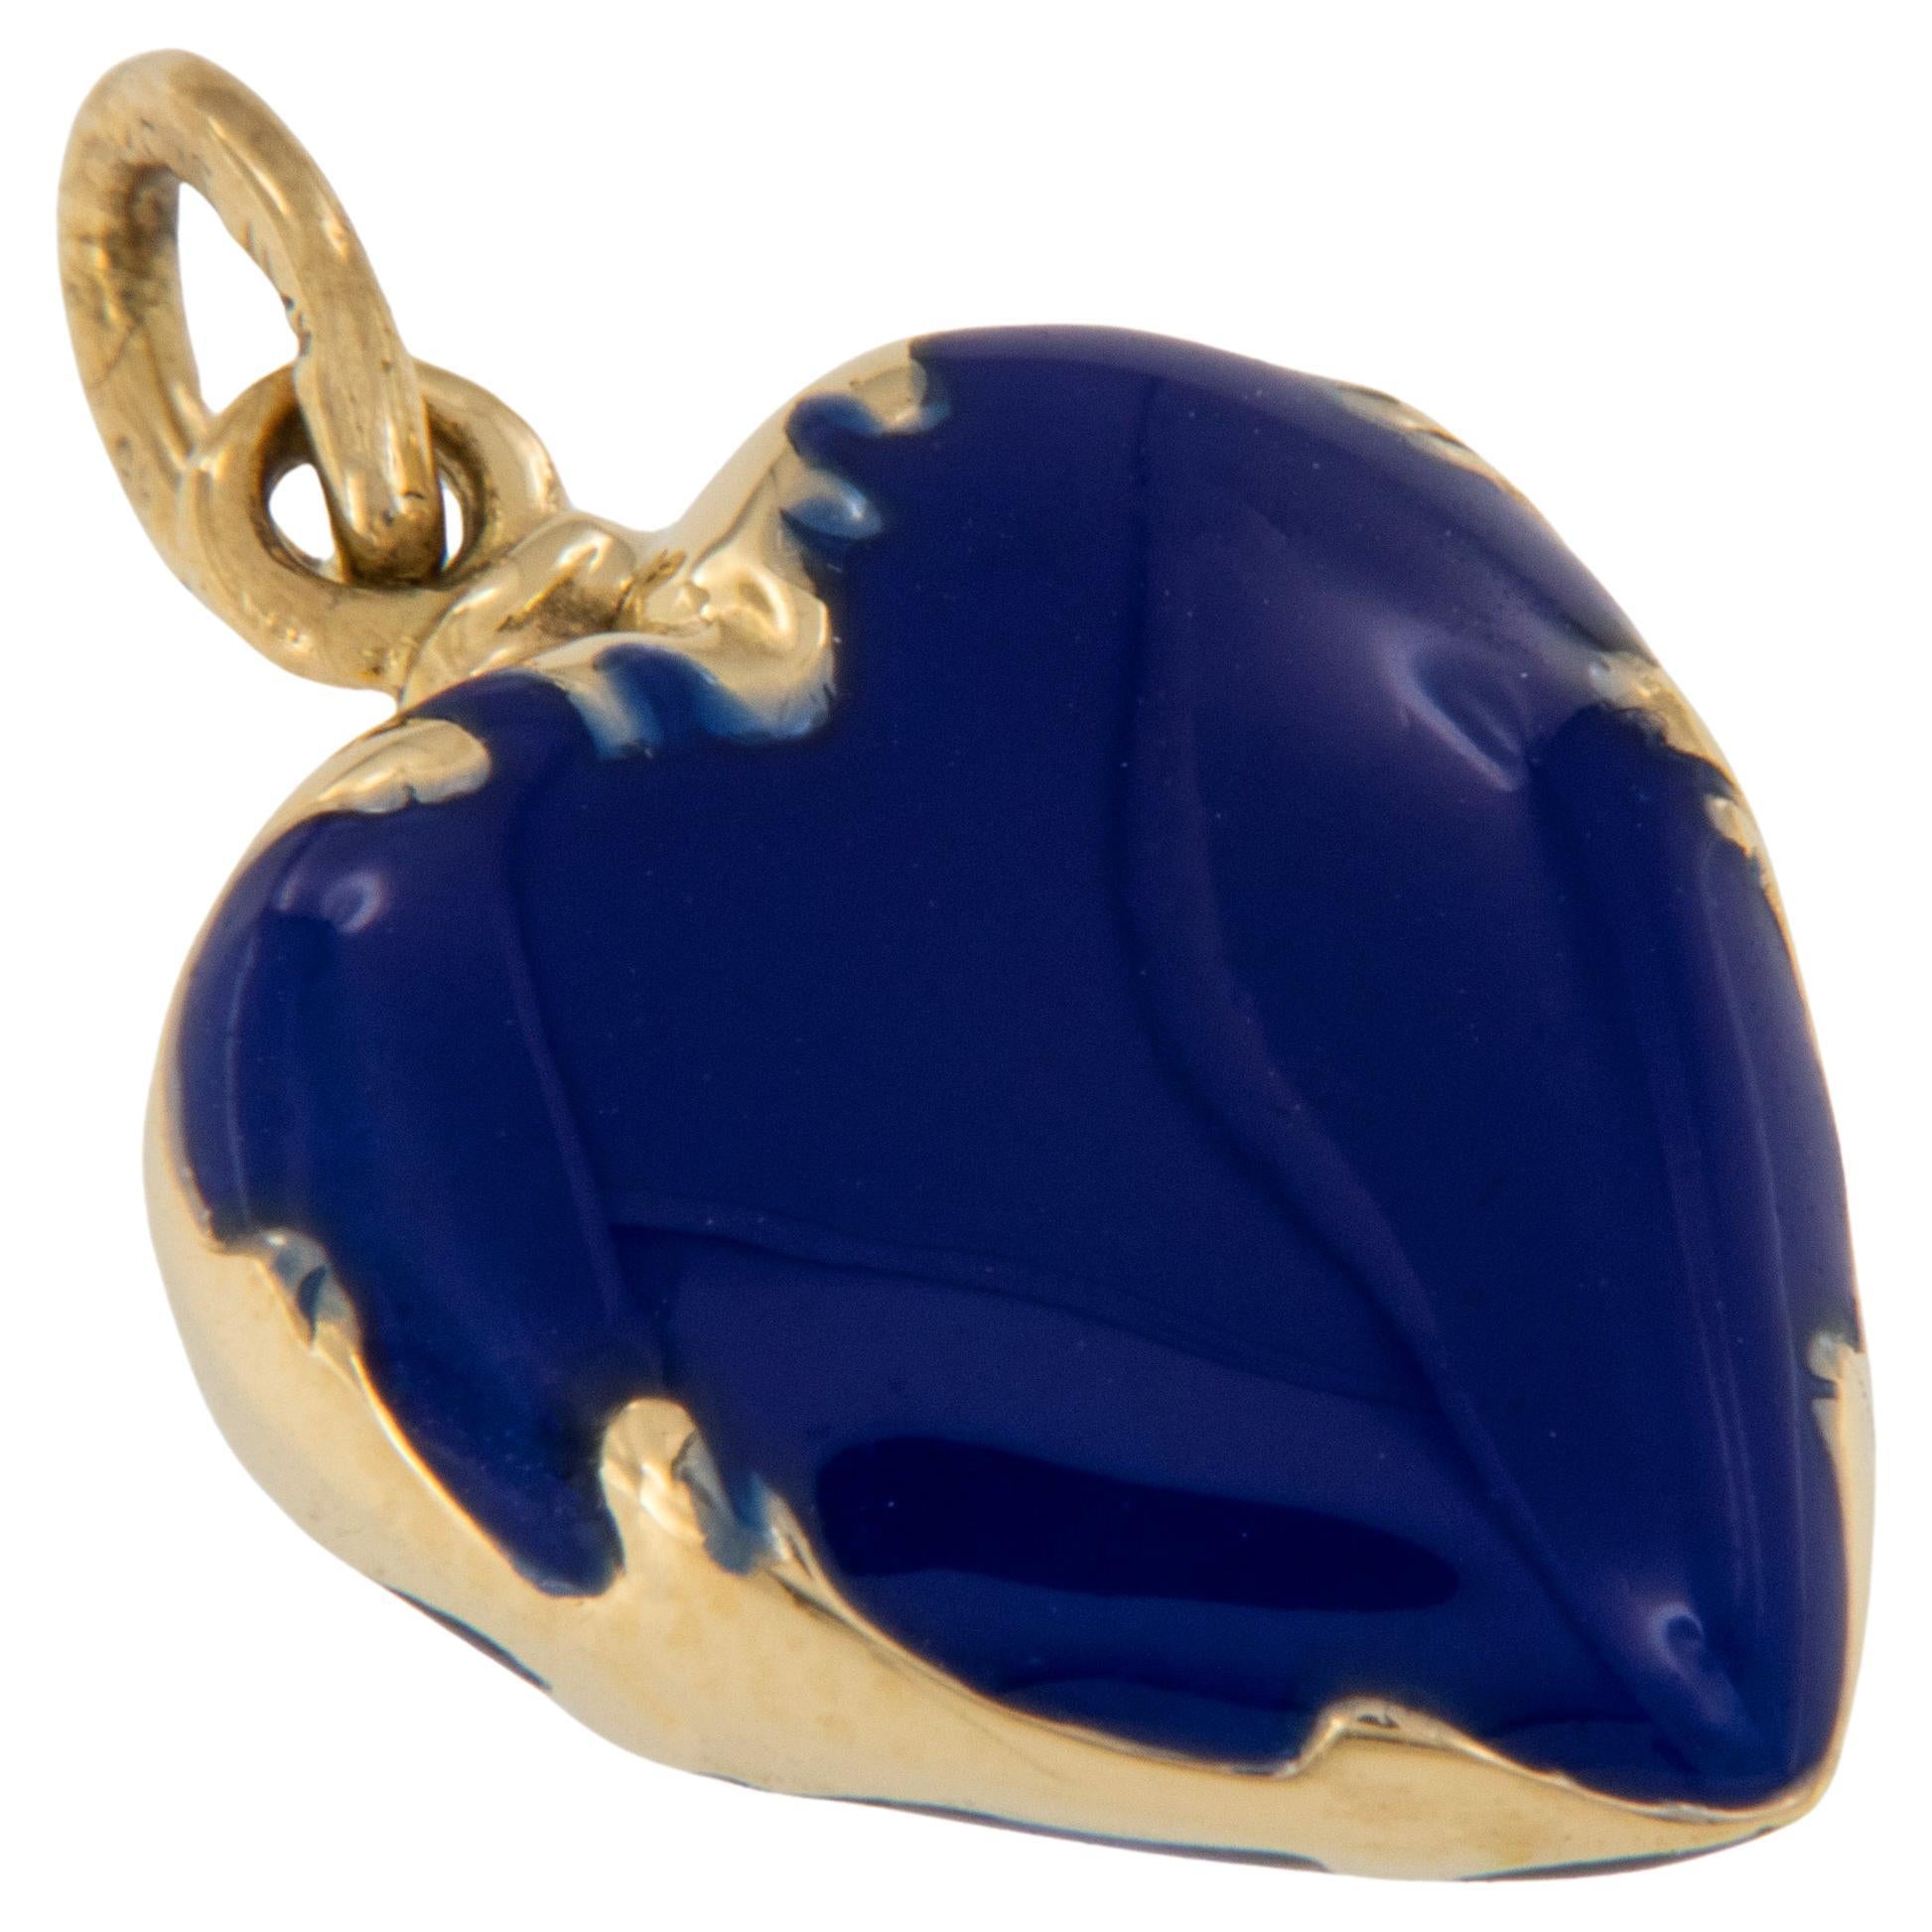 This lovely vintage 18 karat yellow gold German lapis colored enamel heart charm will look lovely suspended from a chain around your neck or hanging off a bracelet. Charm has flowing curved detail on the sides and is in pristine condition. Enameling